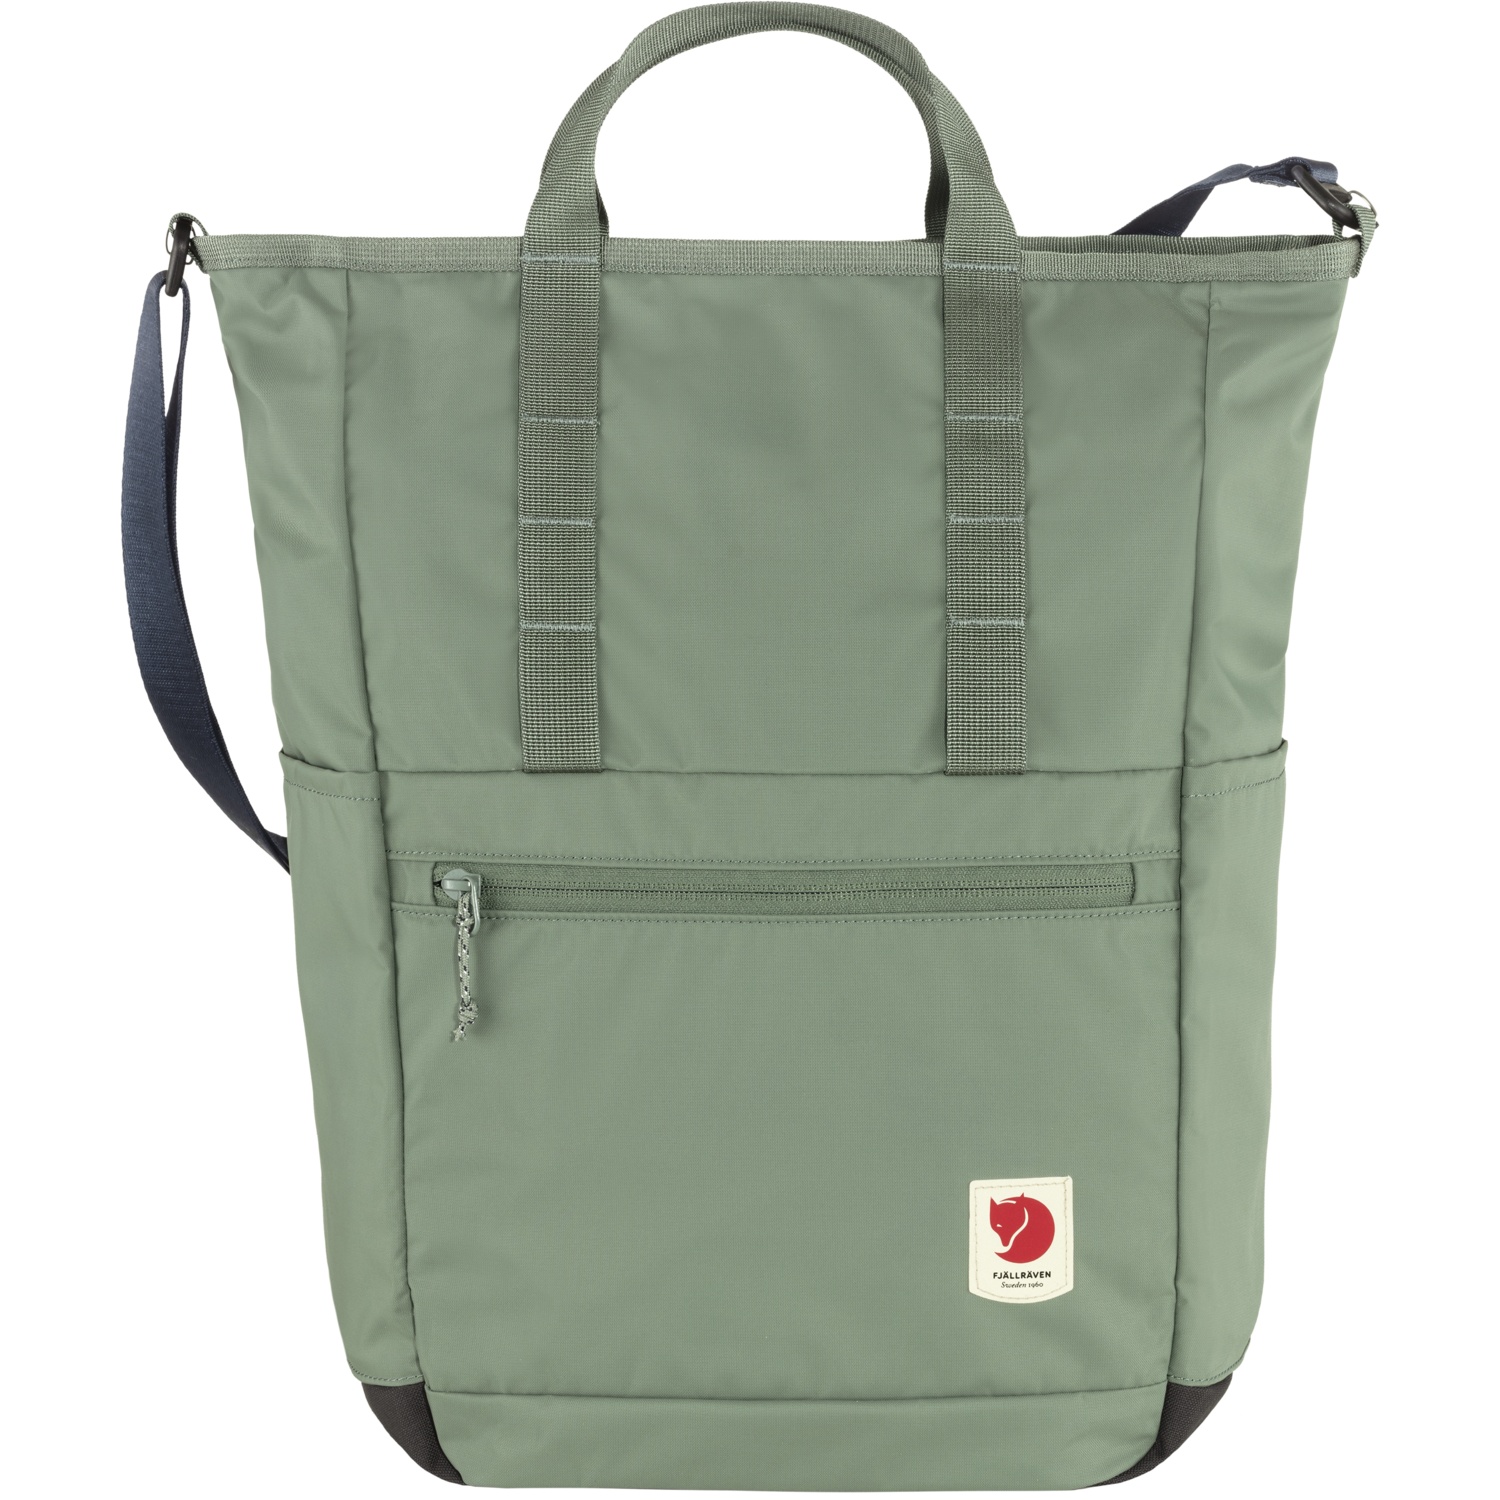 Picture of Fjällräven High Coast Totepack / Backpack - 23L - patina green